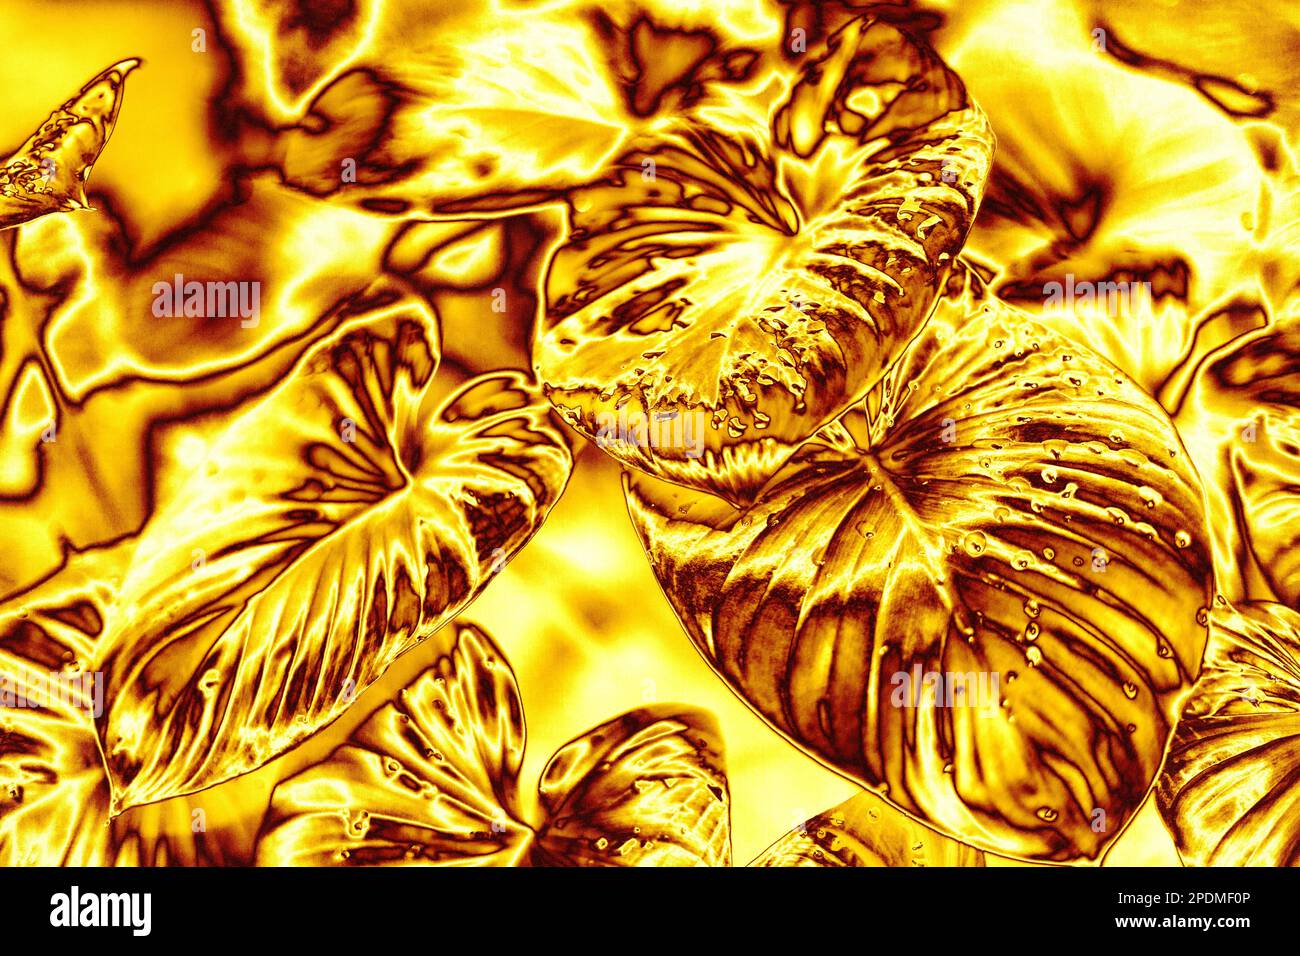 Golden leaves water drops background, gold flower leaf texture, yellow metal tropical foliage backdrop, metallic floral branch pattern, plant ornament Stock Photo